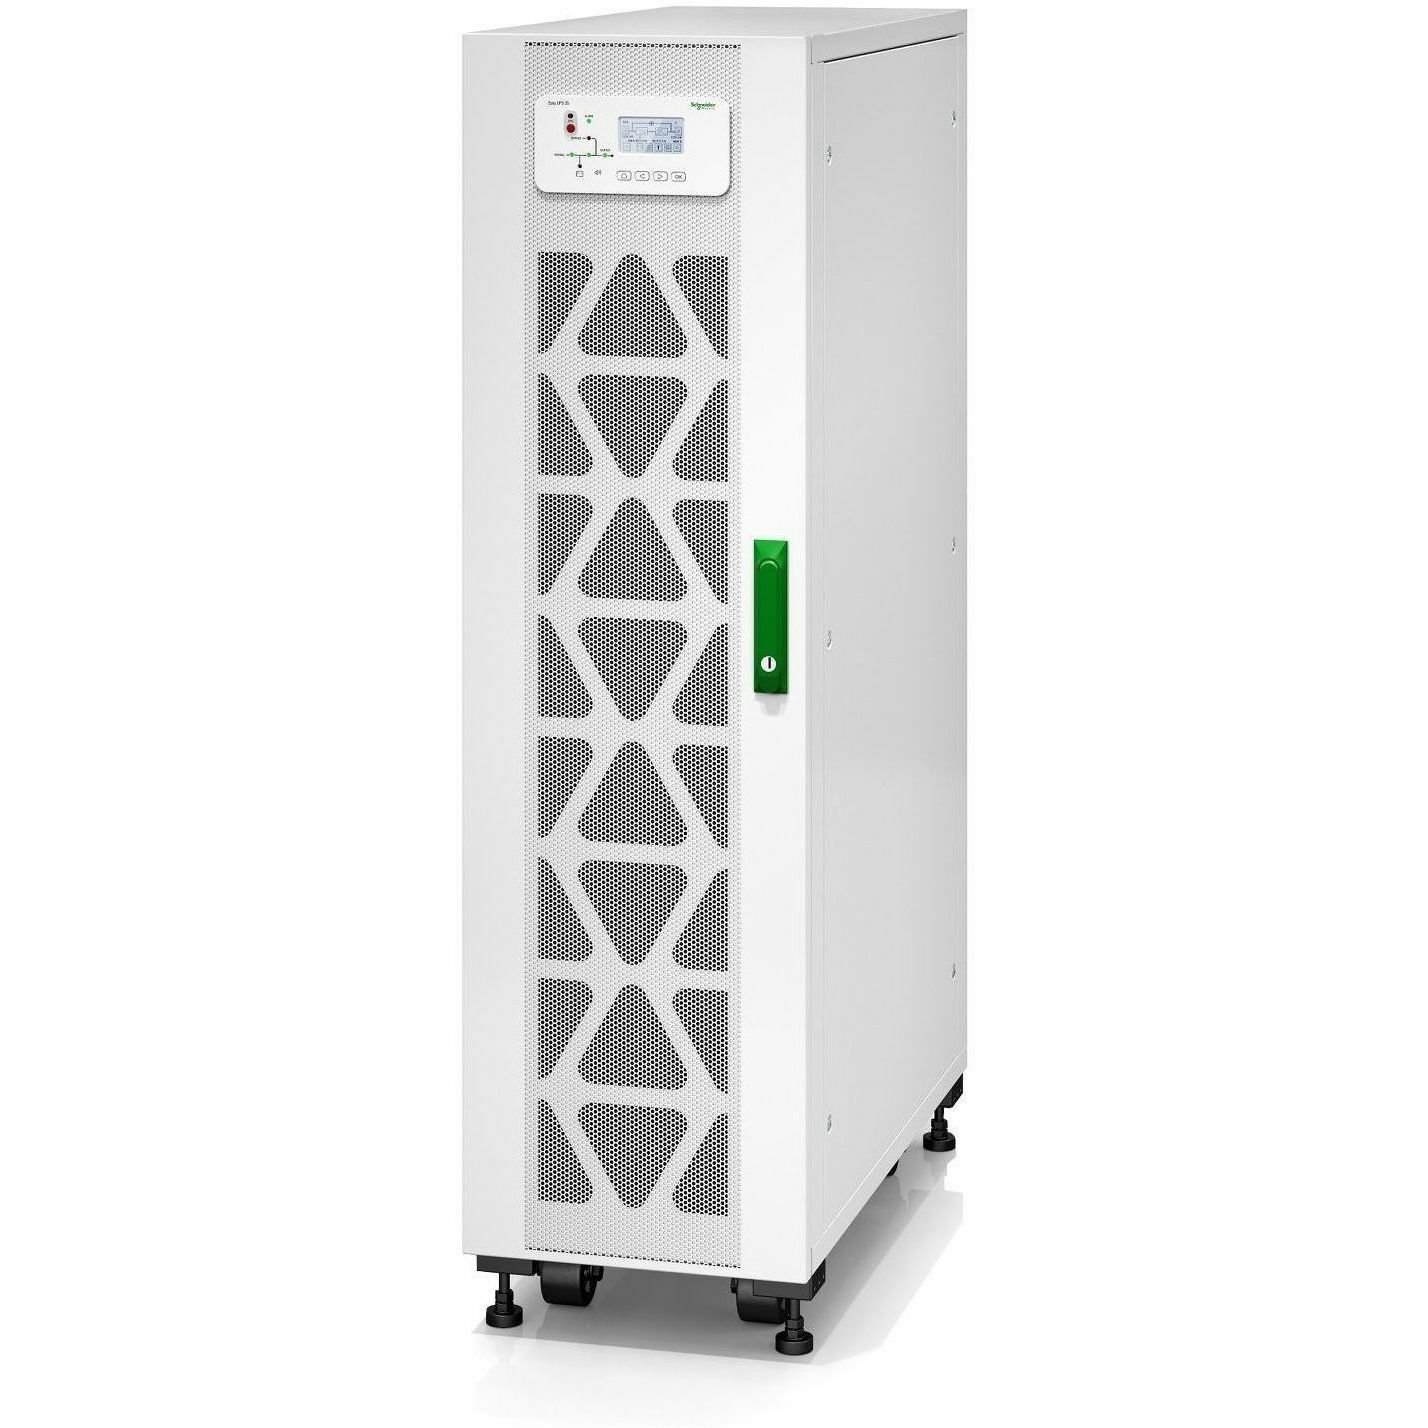 APC by Schneider Electric Easy UPS 3S Double Conversion Online UPS - 20 kVA/20 kW - Three Phase